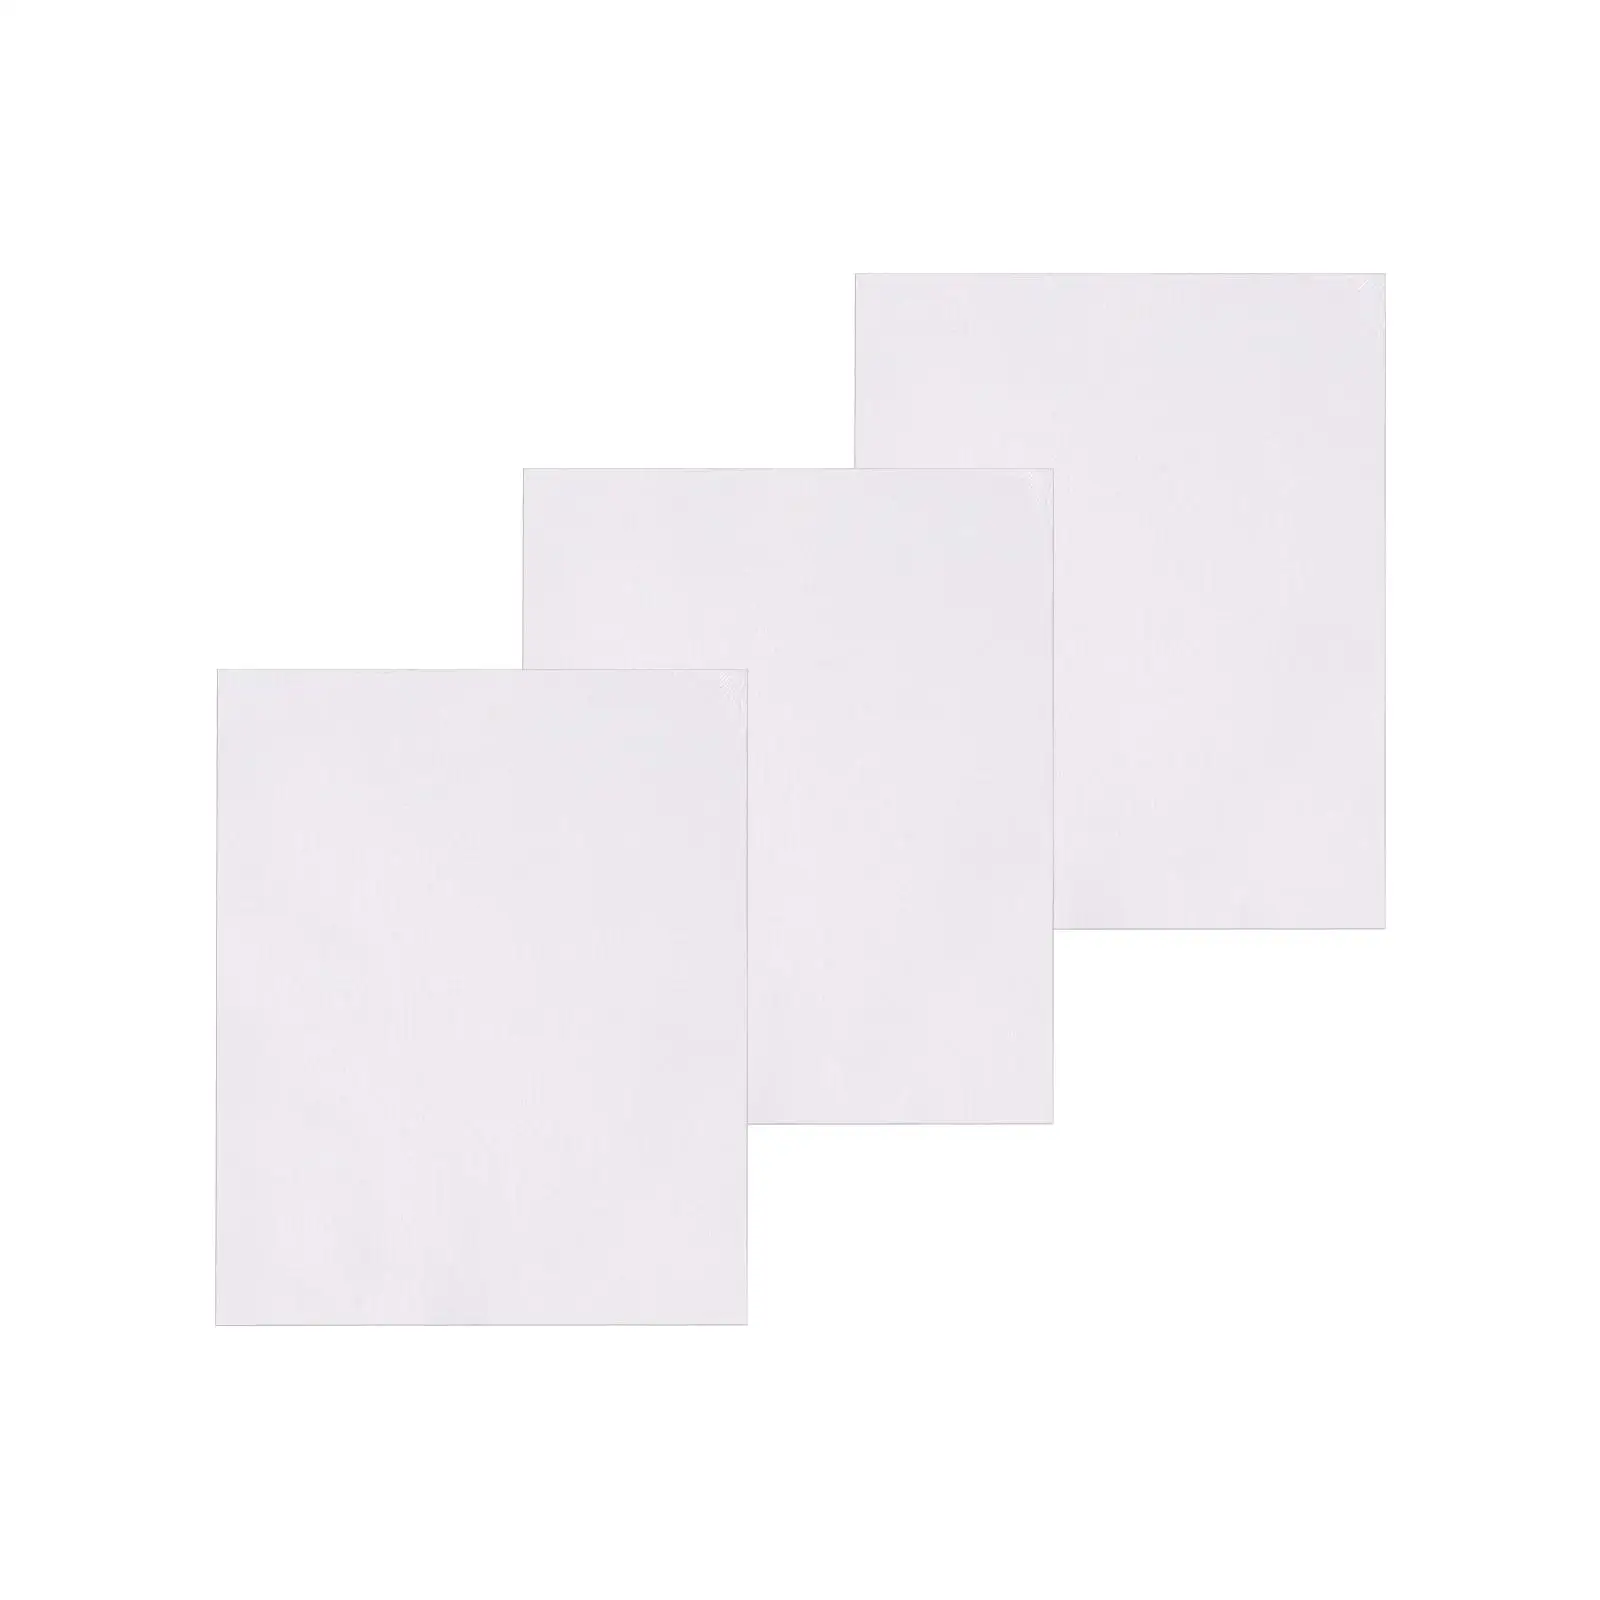 3x Cotton Artist Blank Canvas Boards Acrylic Oil Painting DIY Art Supplies Canvas Panels Primed for Acrylic Painting Adults Kids